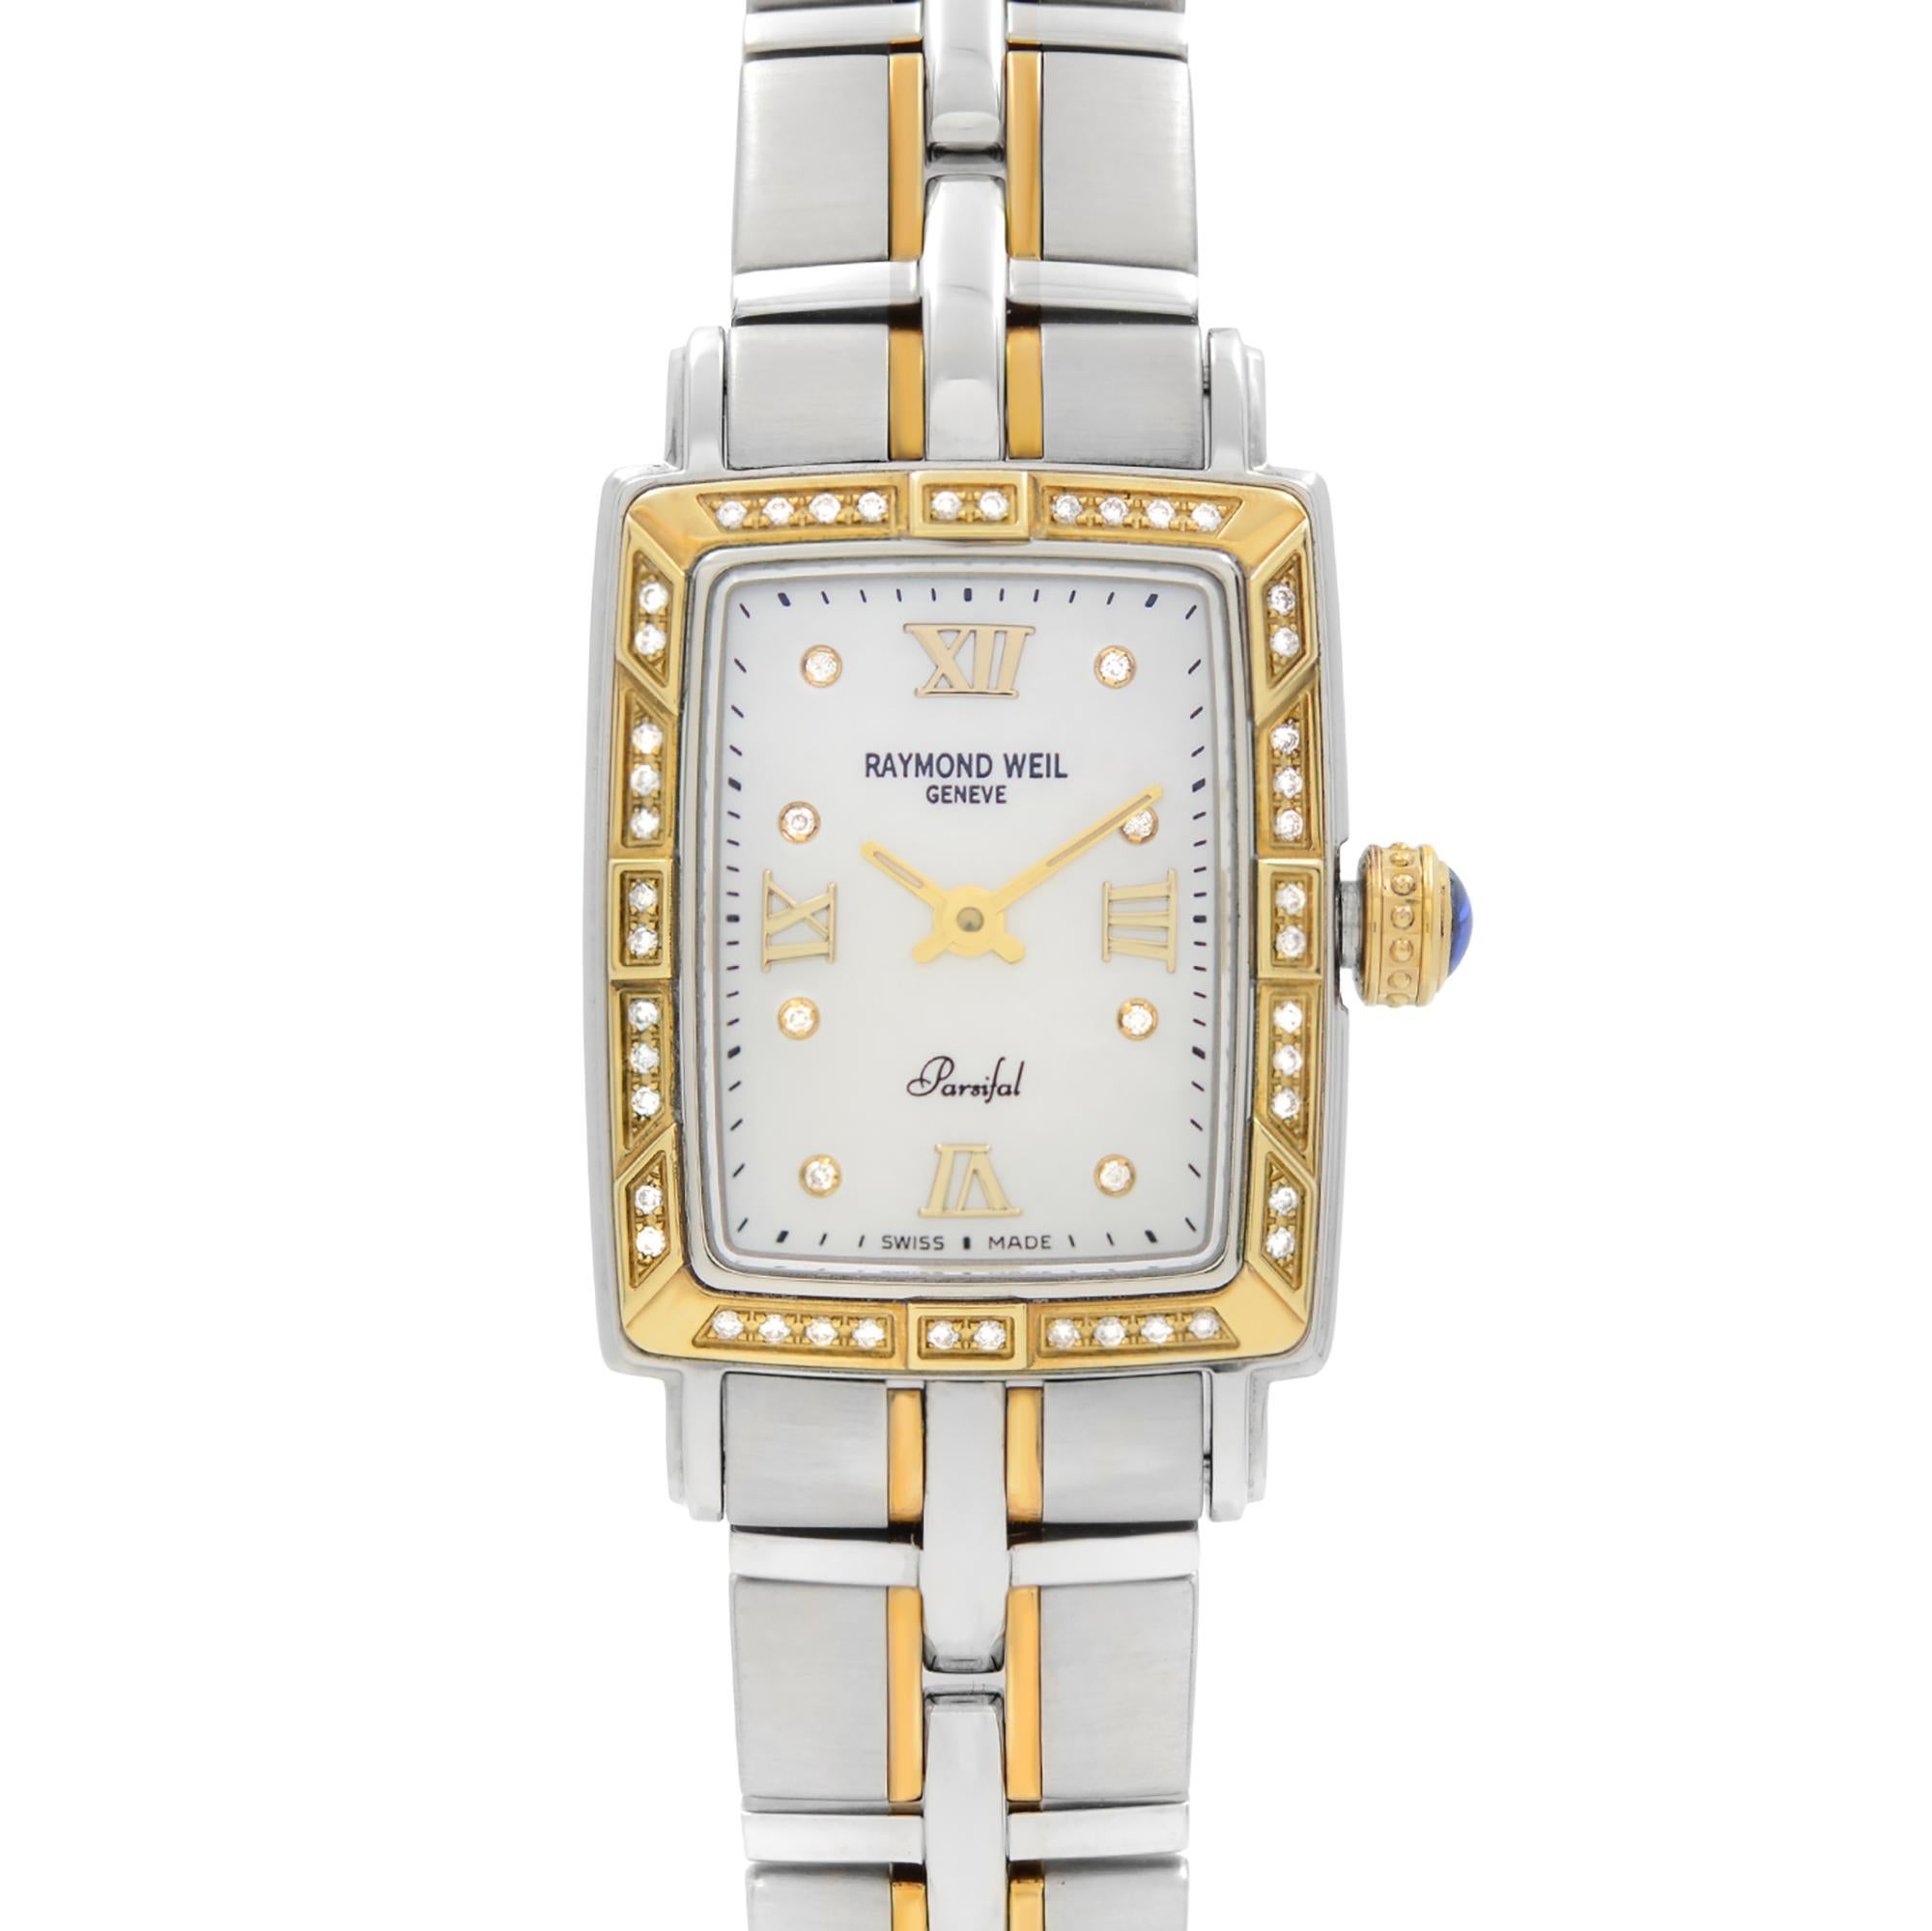 Store Display Model Raymond Weil Parsifal Quartz Ladies Watch 9740-STS-00995. The Timepiece Has Insignificant Blemishes During Store Display. This Beautiful Timepiece Features: Stainless Steel Case with a Two-Tone Stainless Steel Bracelet, Fixed